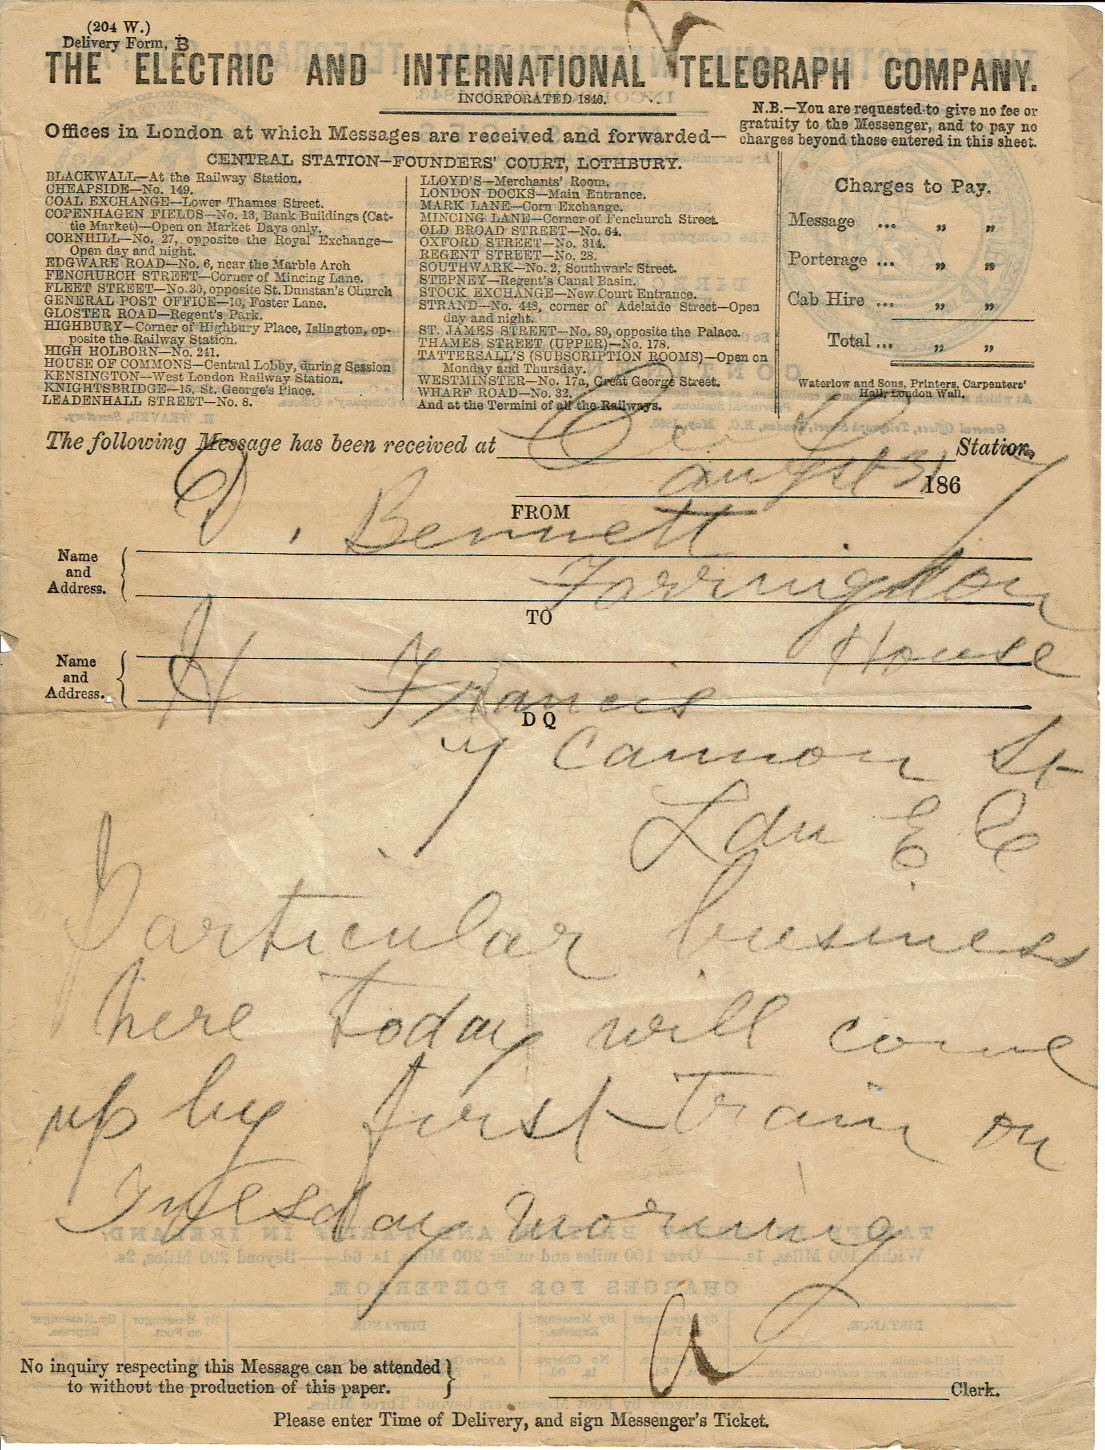 Electric Telegraph Company Stationery - front.